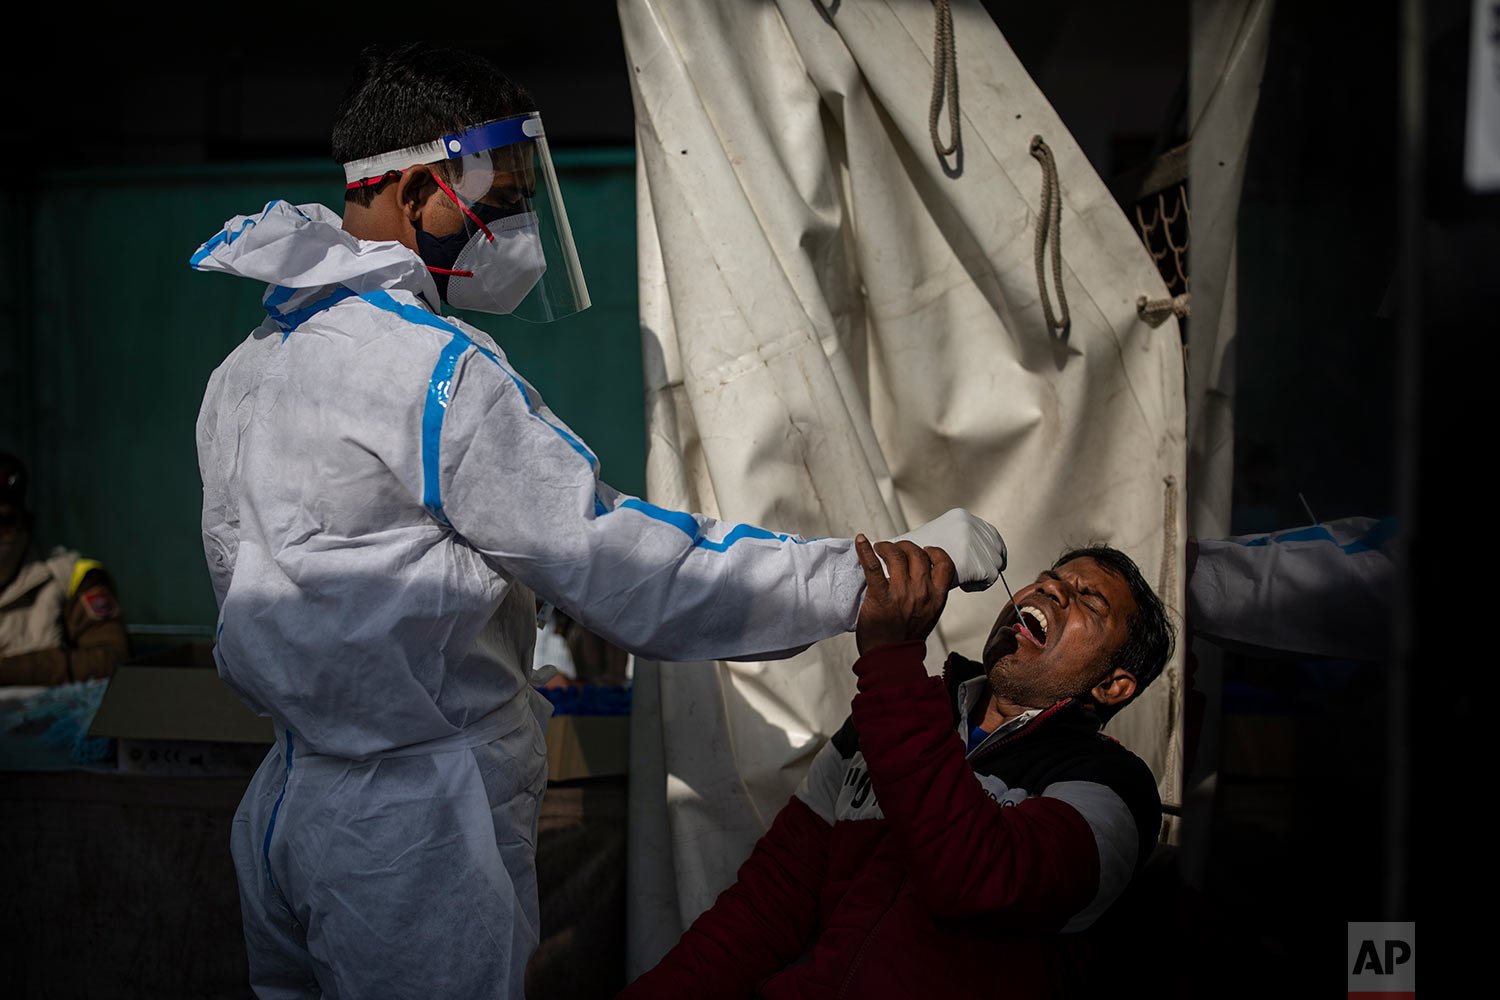  A health worker collects a swab sample of a passenger to test for COVID-19 at a train station in New Delhi, India, Thursday, Dec. 30, 2021.  (AP Photo/Altaf Qadri) 